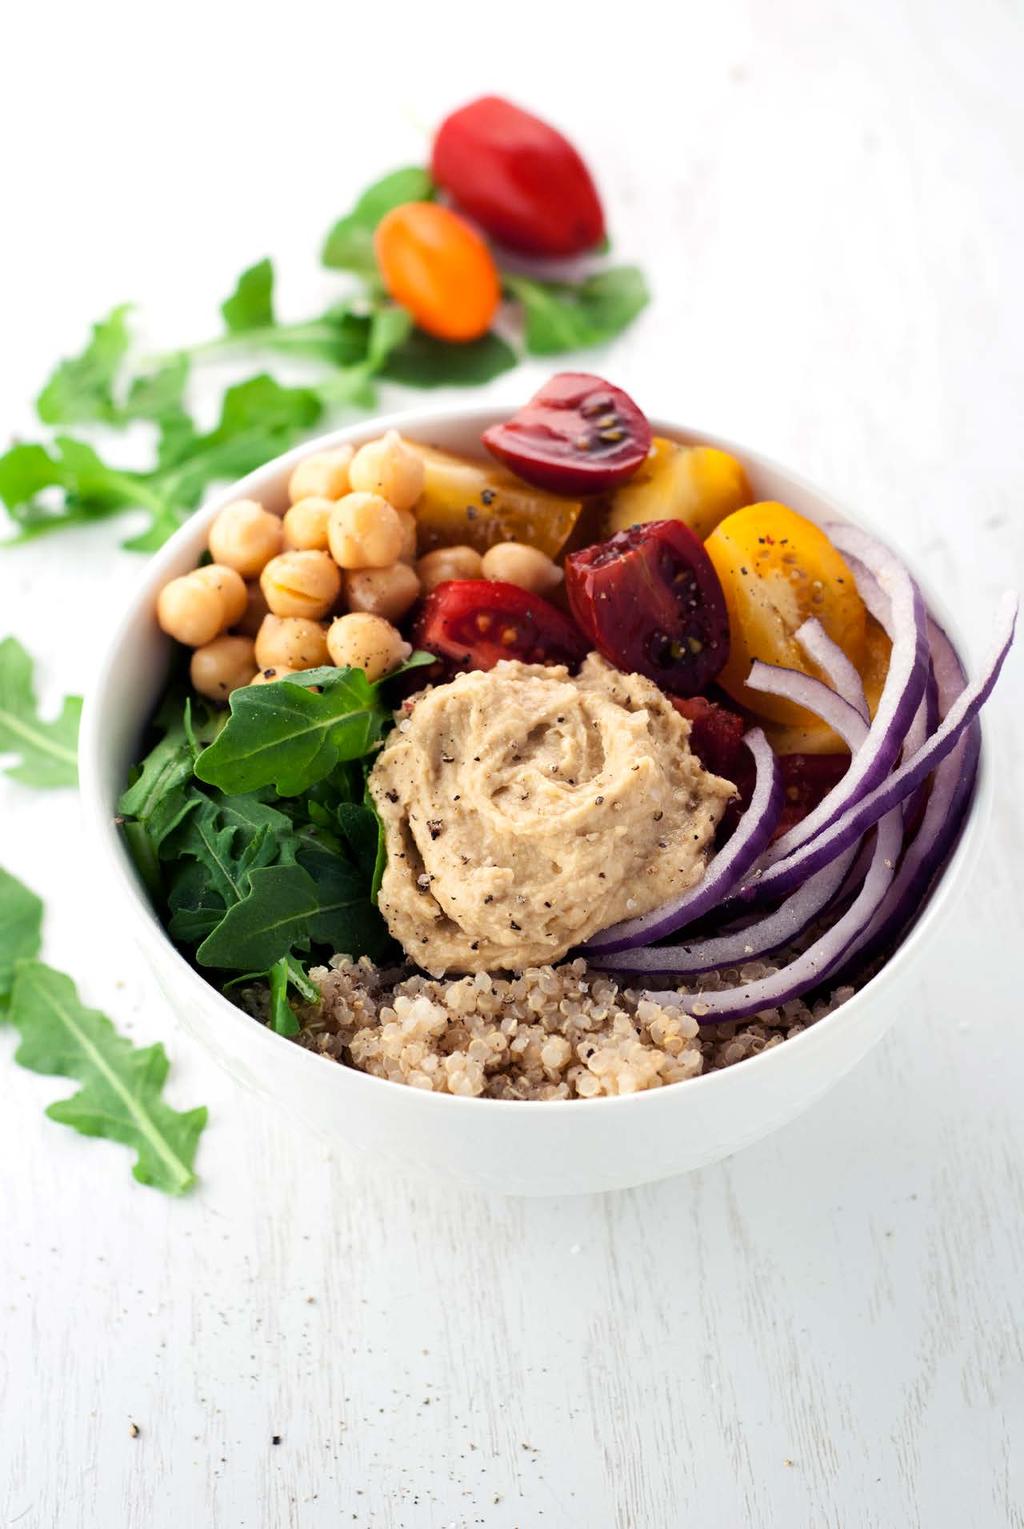 22. Quinoa Hummus Bowl Let your tastebuds travel to the Mediterranean with this tasty Quinoa Hummus Bowl filled with simple, delicious ingredients, and ready to devour in minutes!